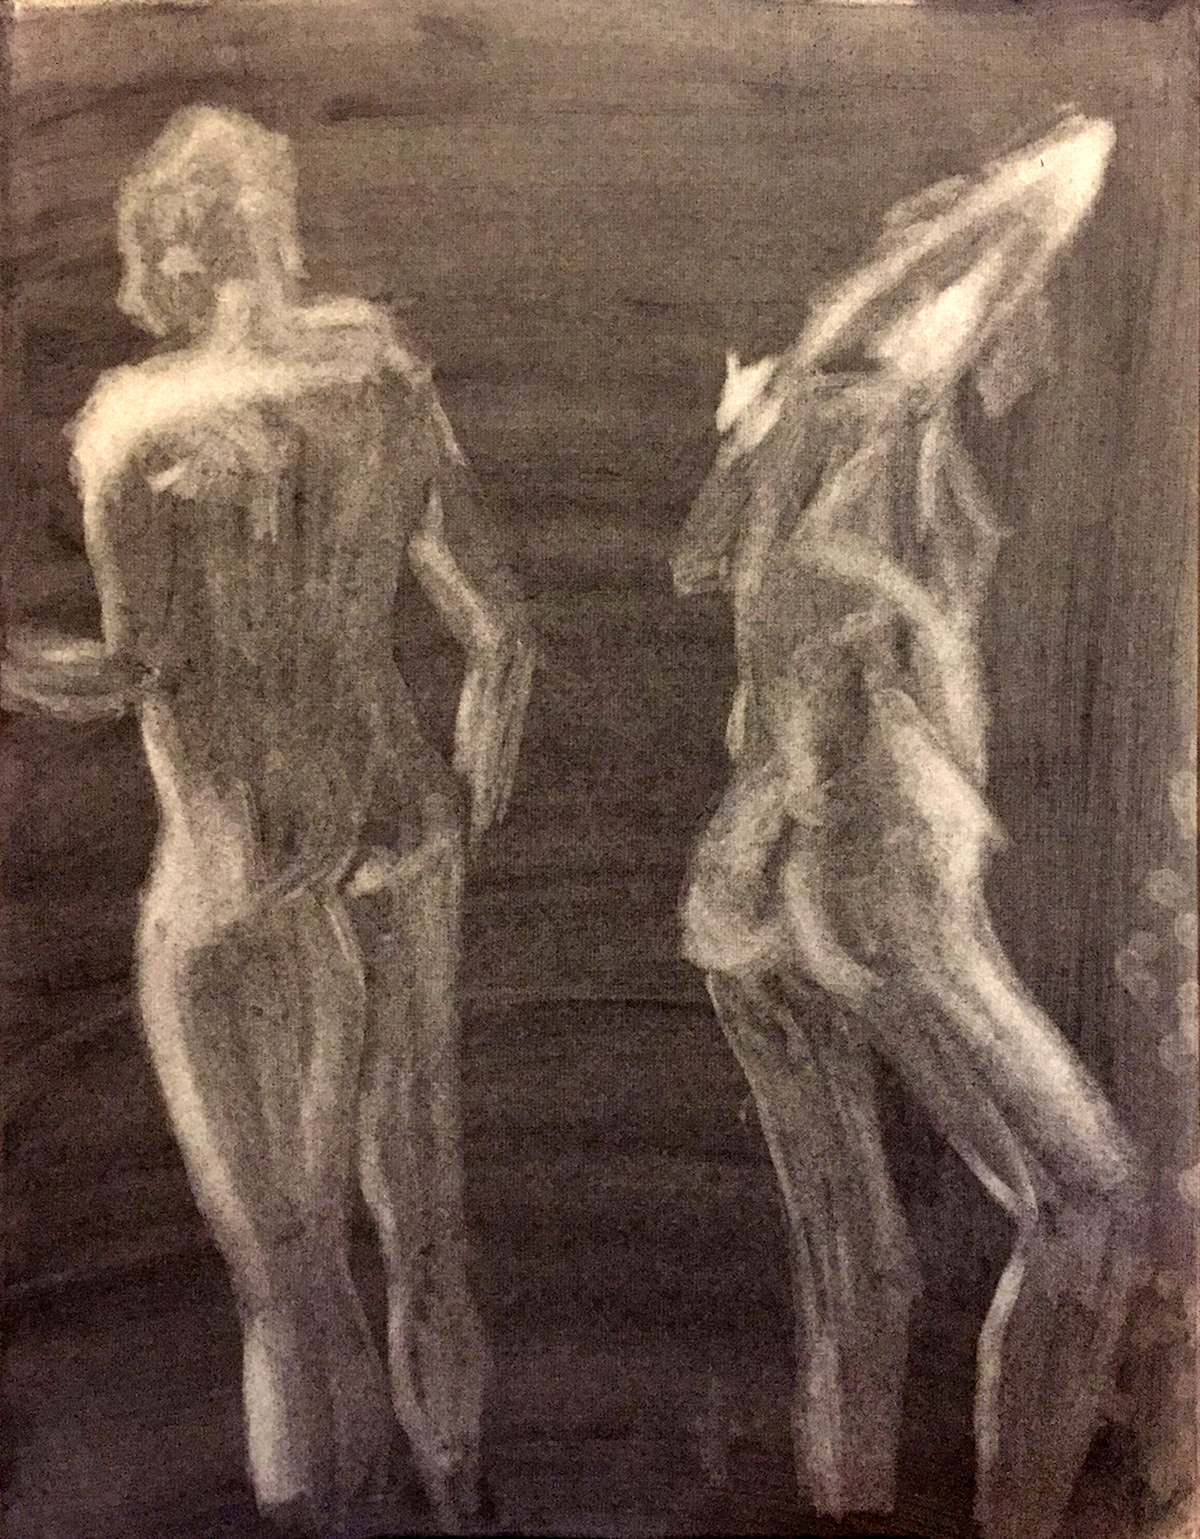 charcoal conte conte crayon pastel India ink ink pen Figure Study Figure Drawing